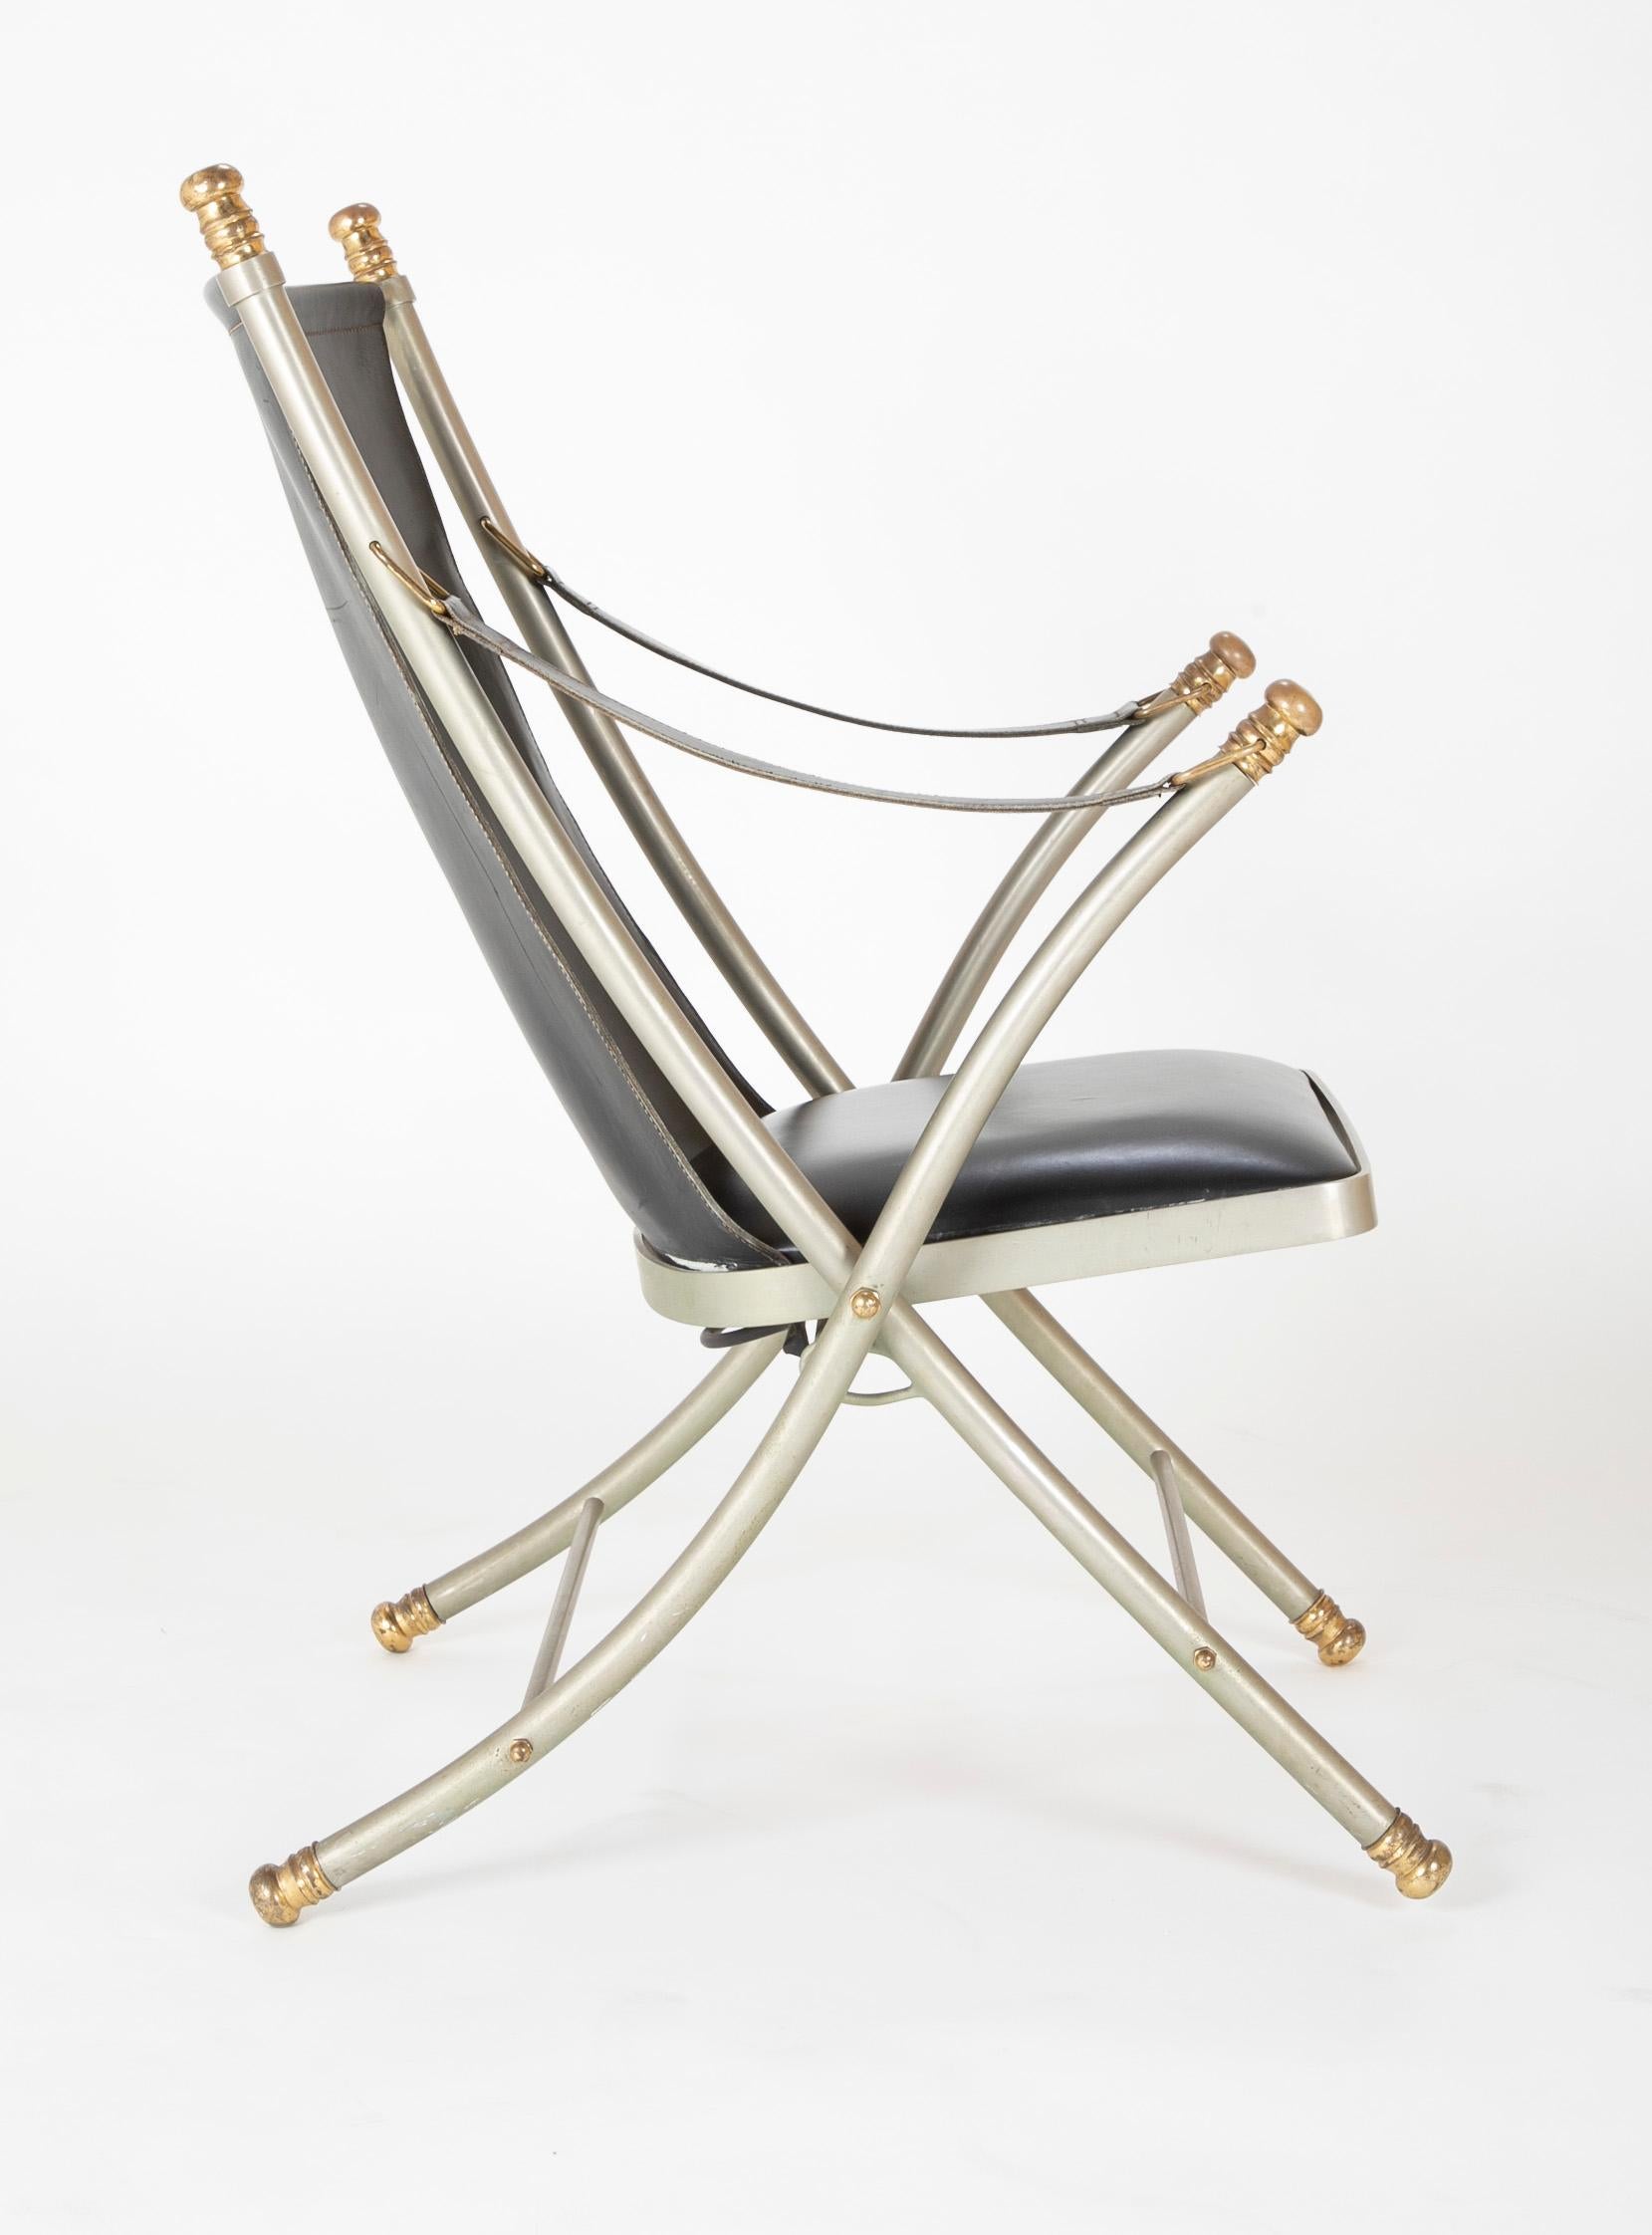 Maison Jansen Brushed Steel and Brass Campaign Armchair 7